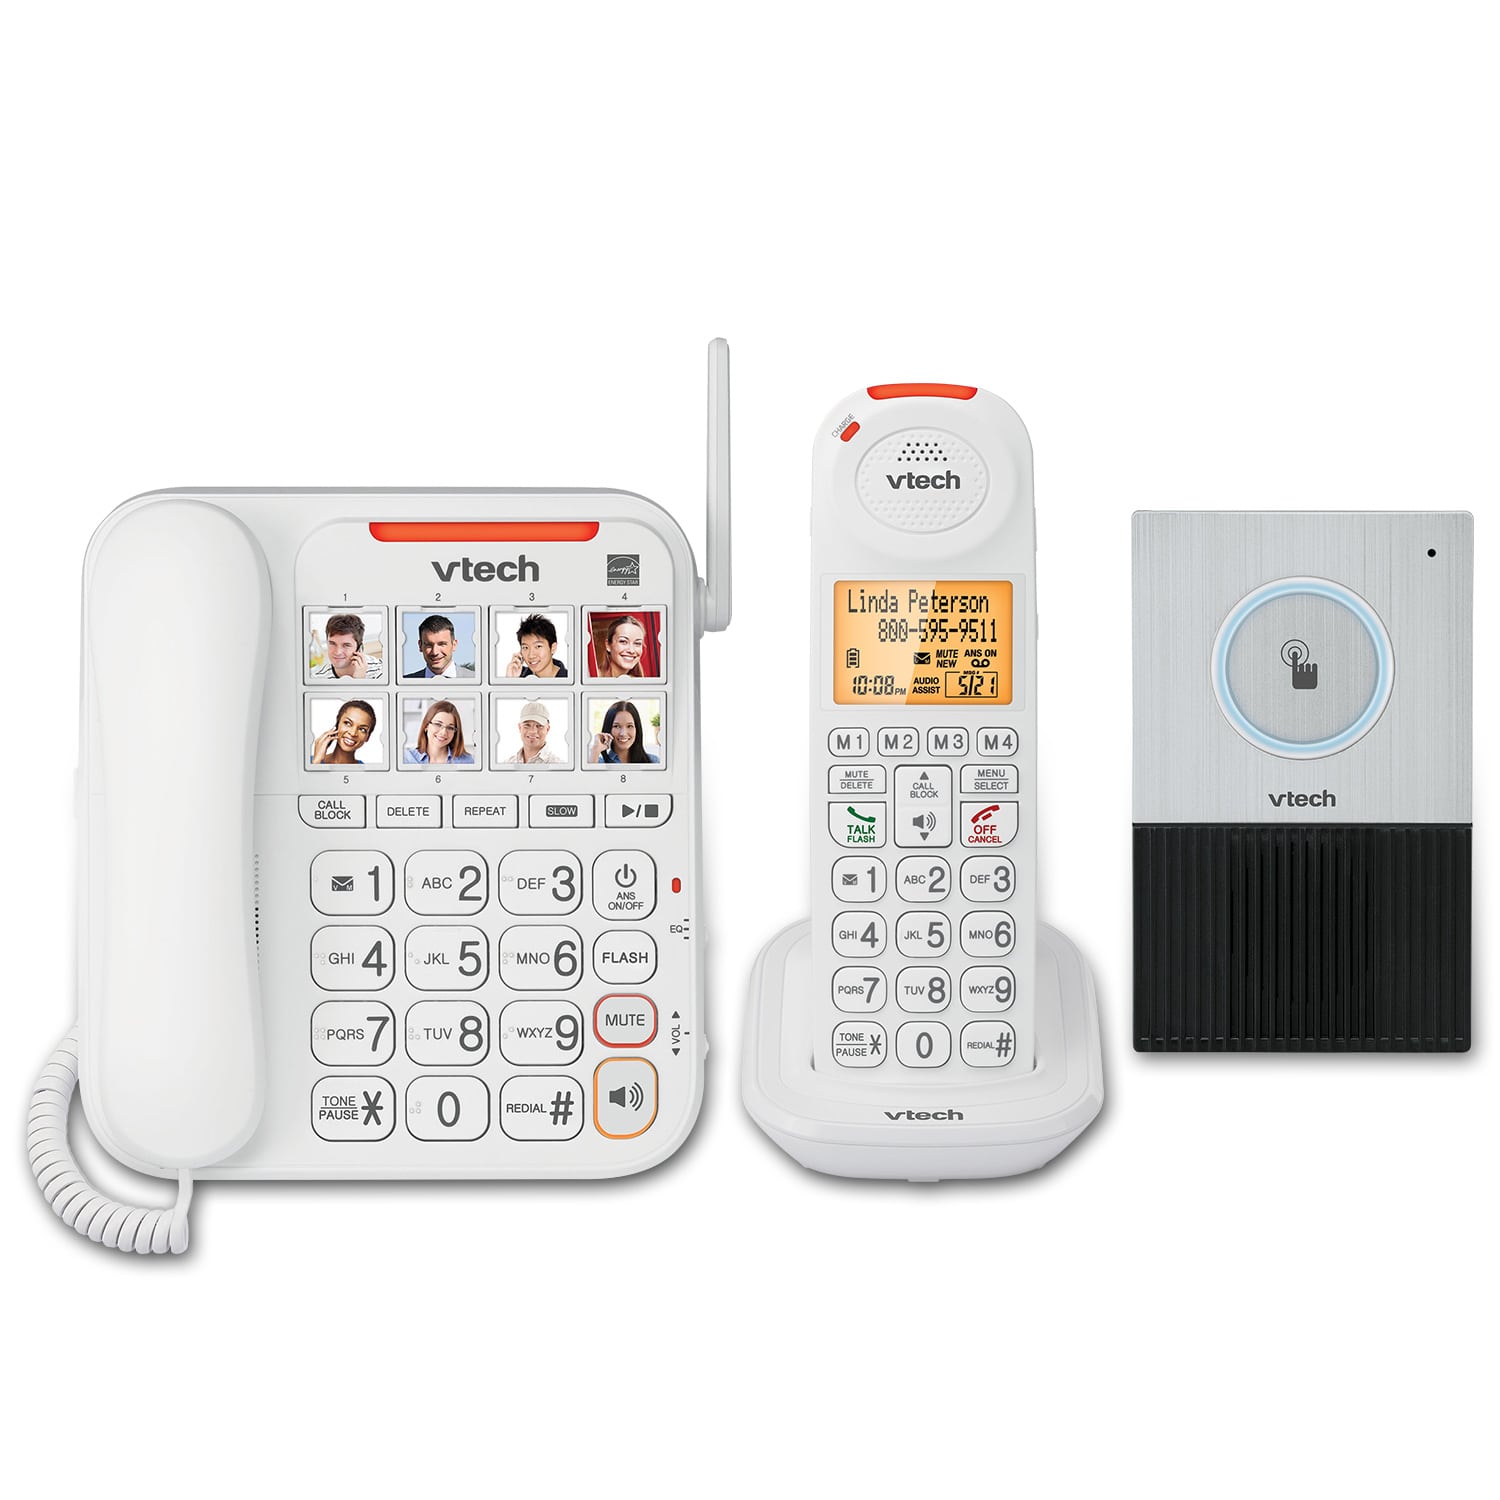 Amplified Corded/Cordless Answering system with Cordless Audio Doorbell and Smart Call Blocker - view 1